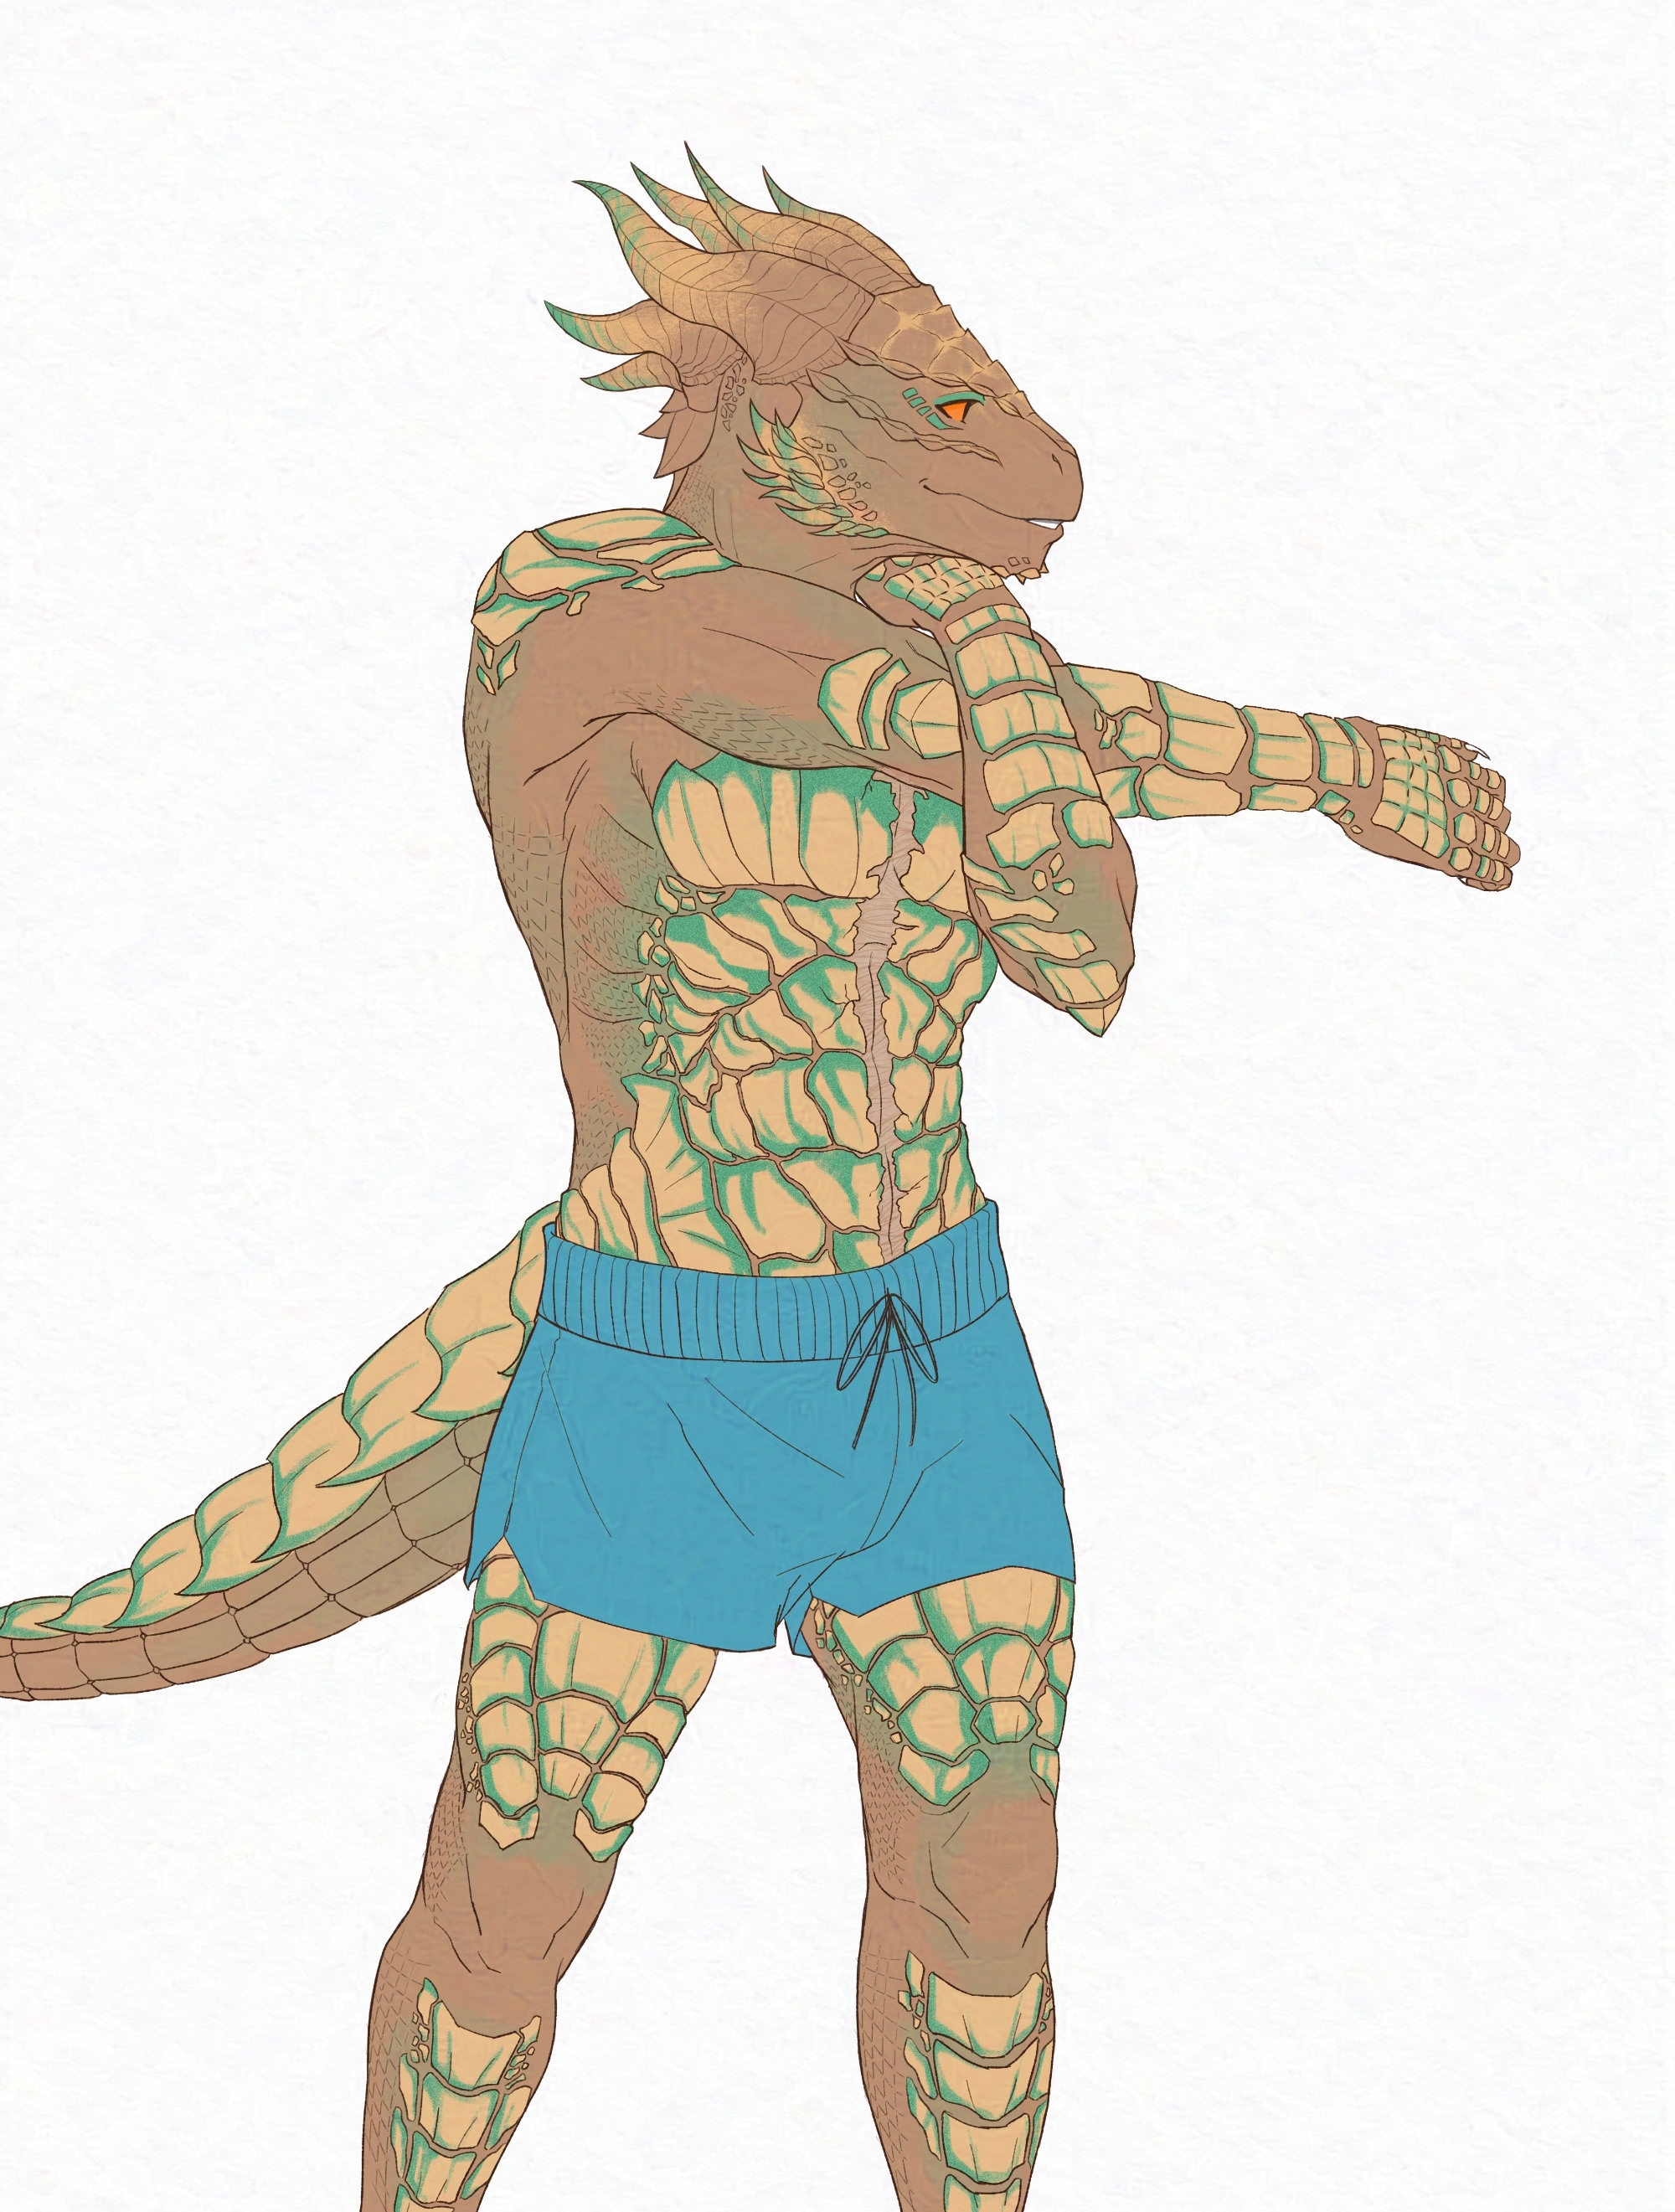 Daamric (a bronze Dragonborn) is doing warm up excercise by stretching his left arm, hooked by his right arm. He's looking towards the side. He's dressed in green shorts.